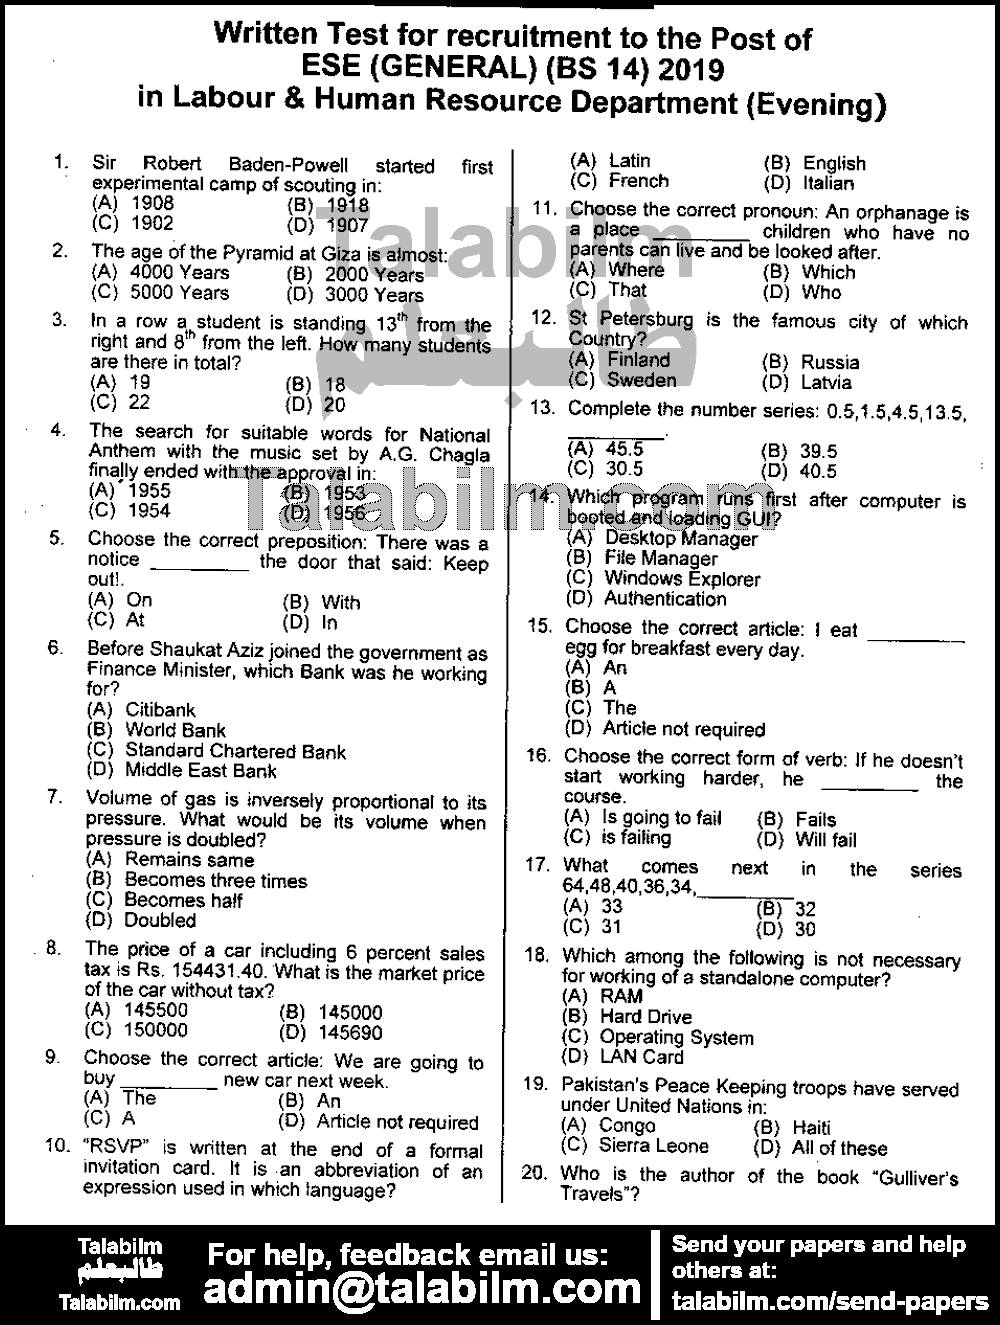 General Elementary School Educator 0 past paper for 2019 Evening Paper 